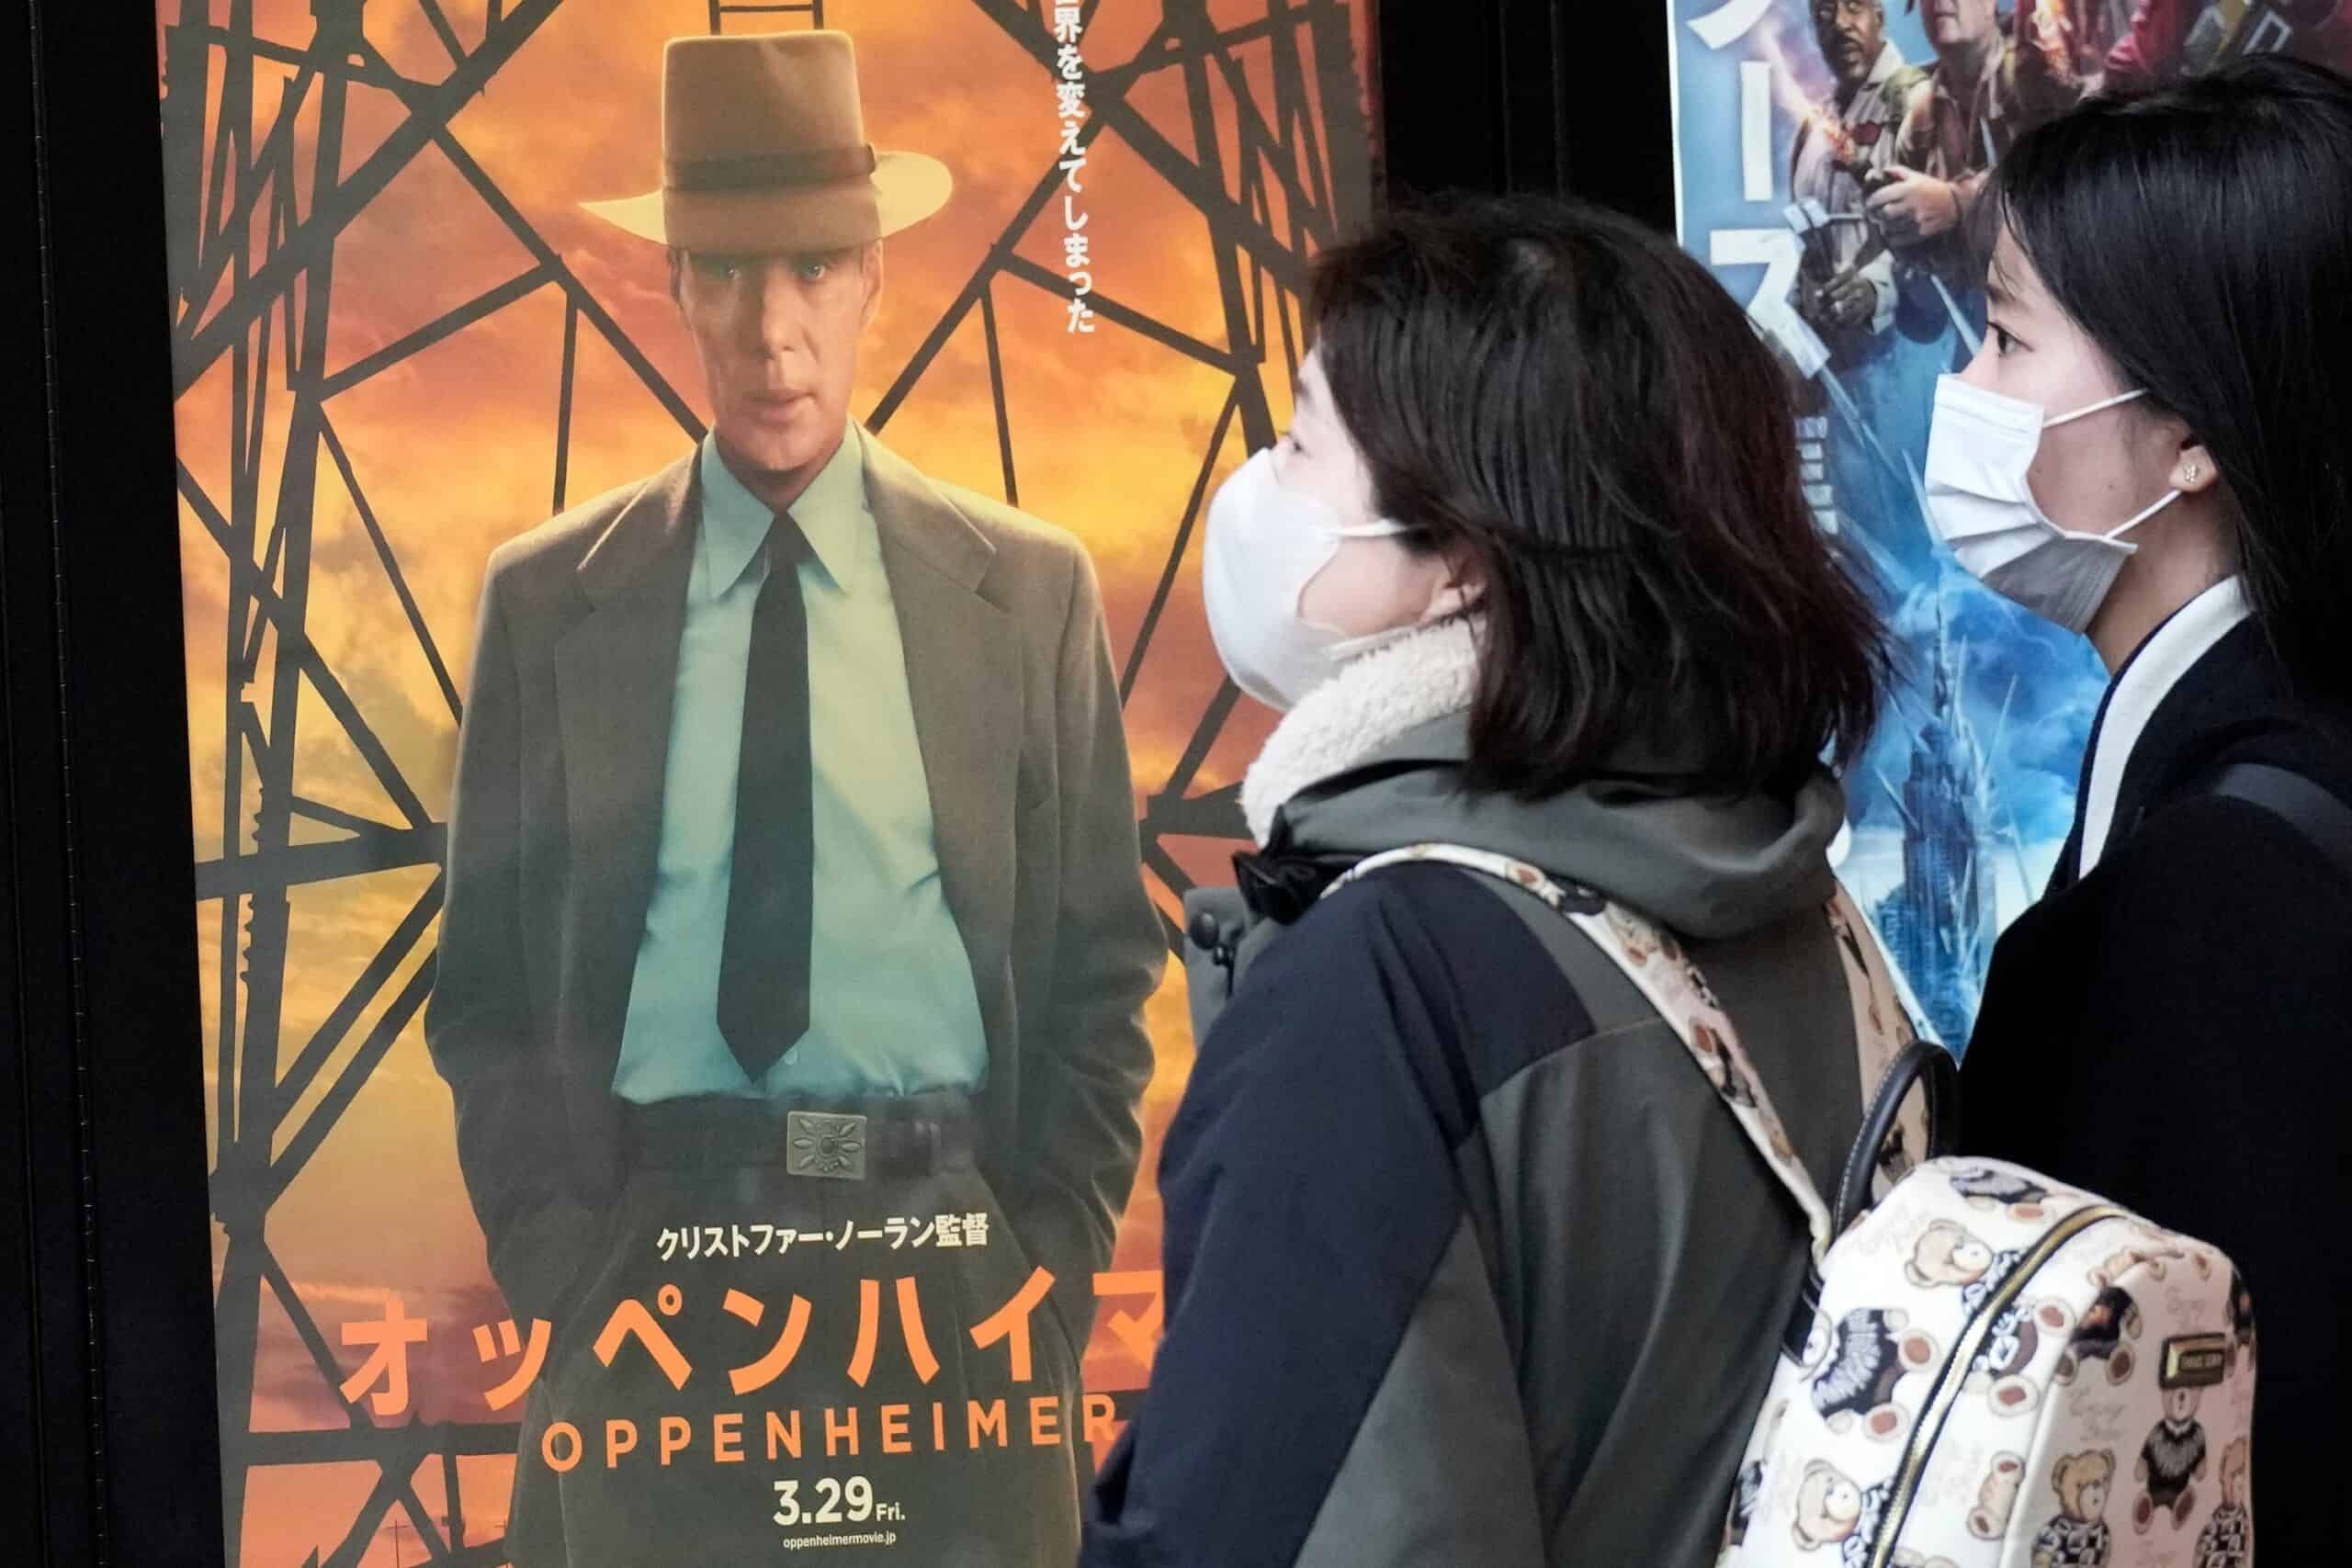 Oppenheimer finally premieres in Japan to mixed reactions and high emotions